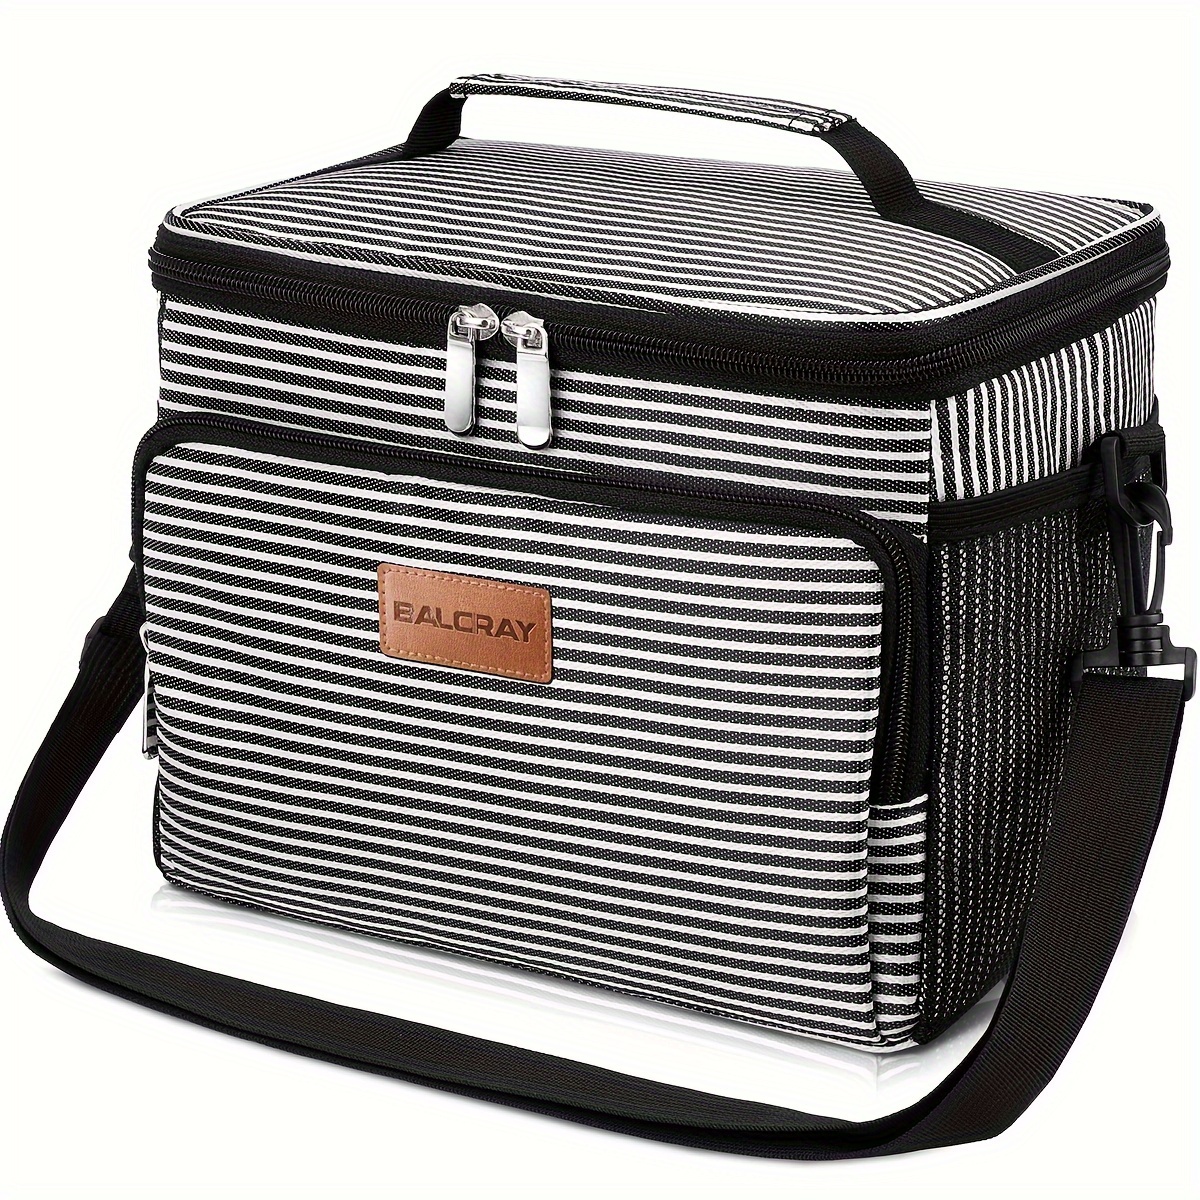 

G-493 Black & White Striped Insulated Lunch Bag